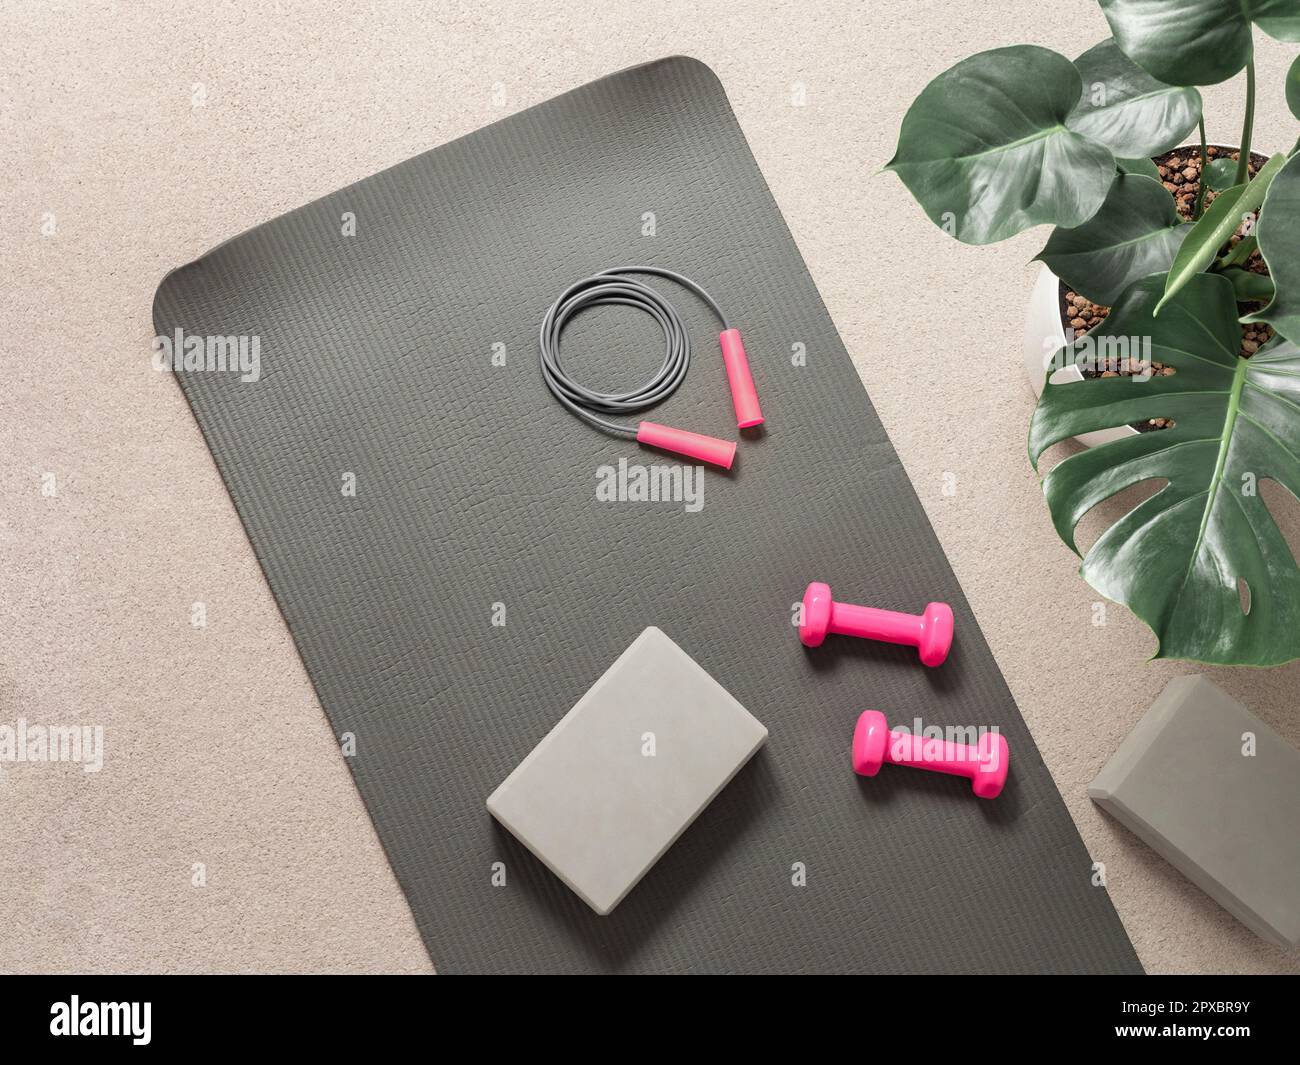 https://c8.alamy.com/comp/2PXBR9Y/stylish-gray-and-pink-home-fitness-flat-lay-top-view-of-gray-sport-mat-yoga-block-skipping-rope-and-pink-dumbbells-on-neutral-carpet-background-mo-2PXBR9Y.jpg